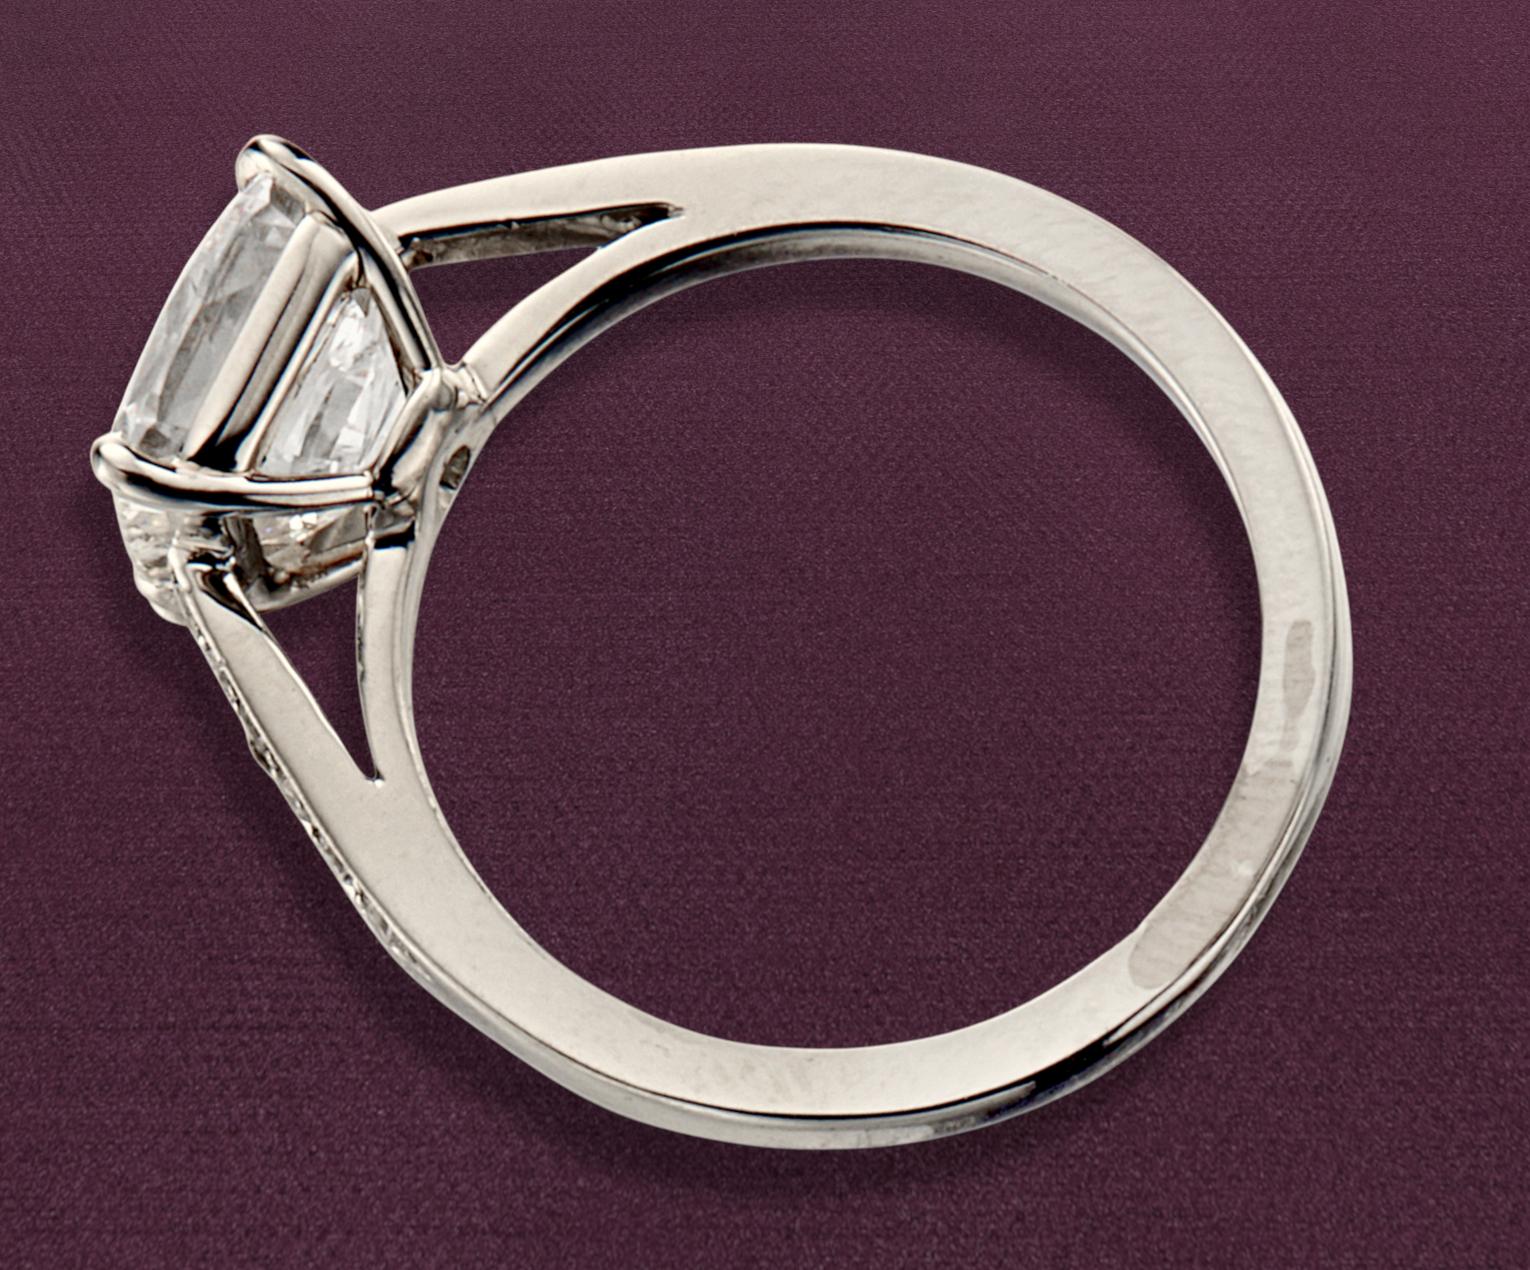 Engagement ring of 2.50 carat weight.
The main stone is a 2.50 CT diamond, G color and VS2 clarity according to the GIA report.

The setting is made in solid 18k white gold.